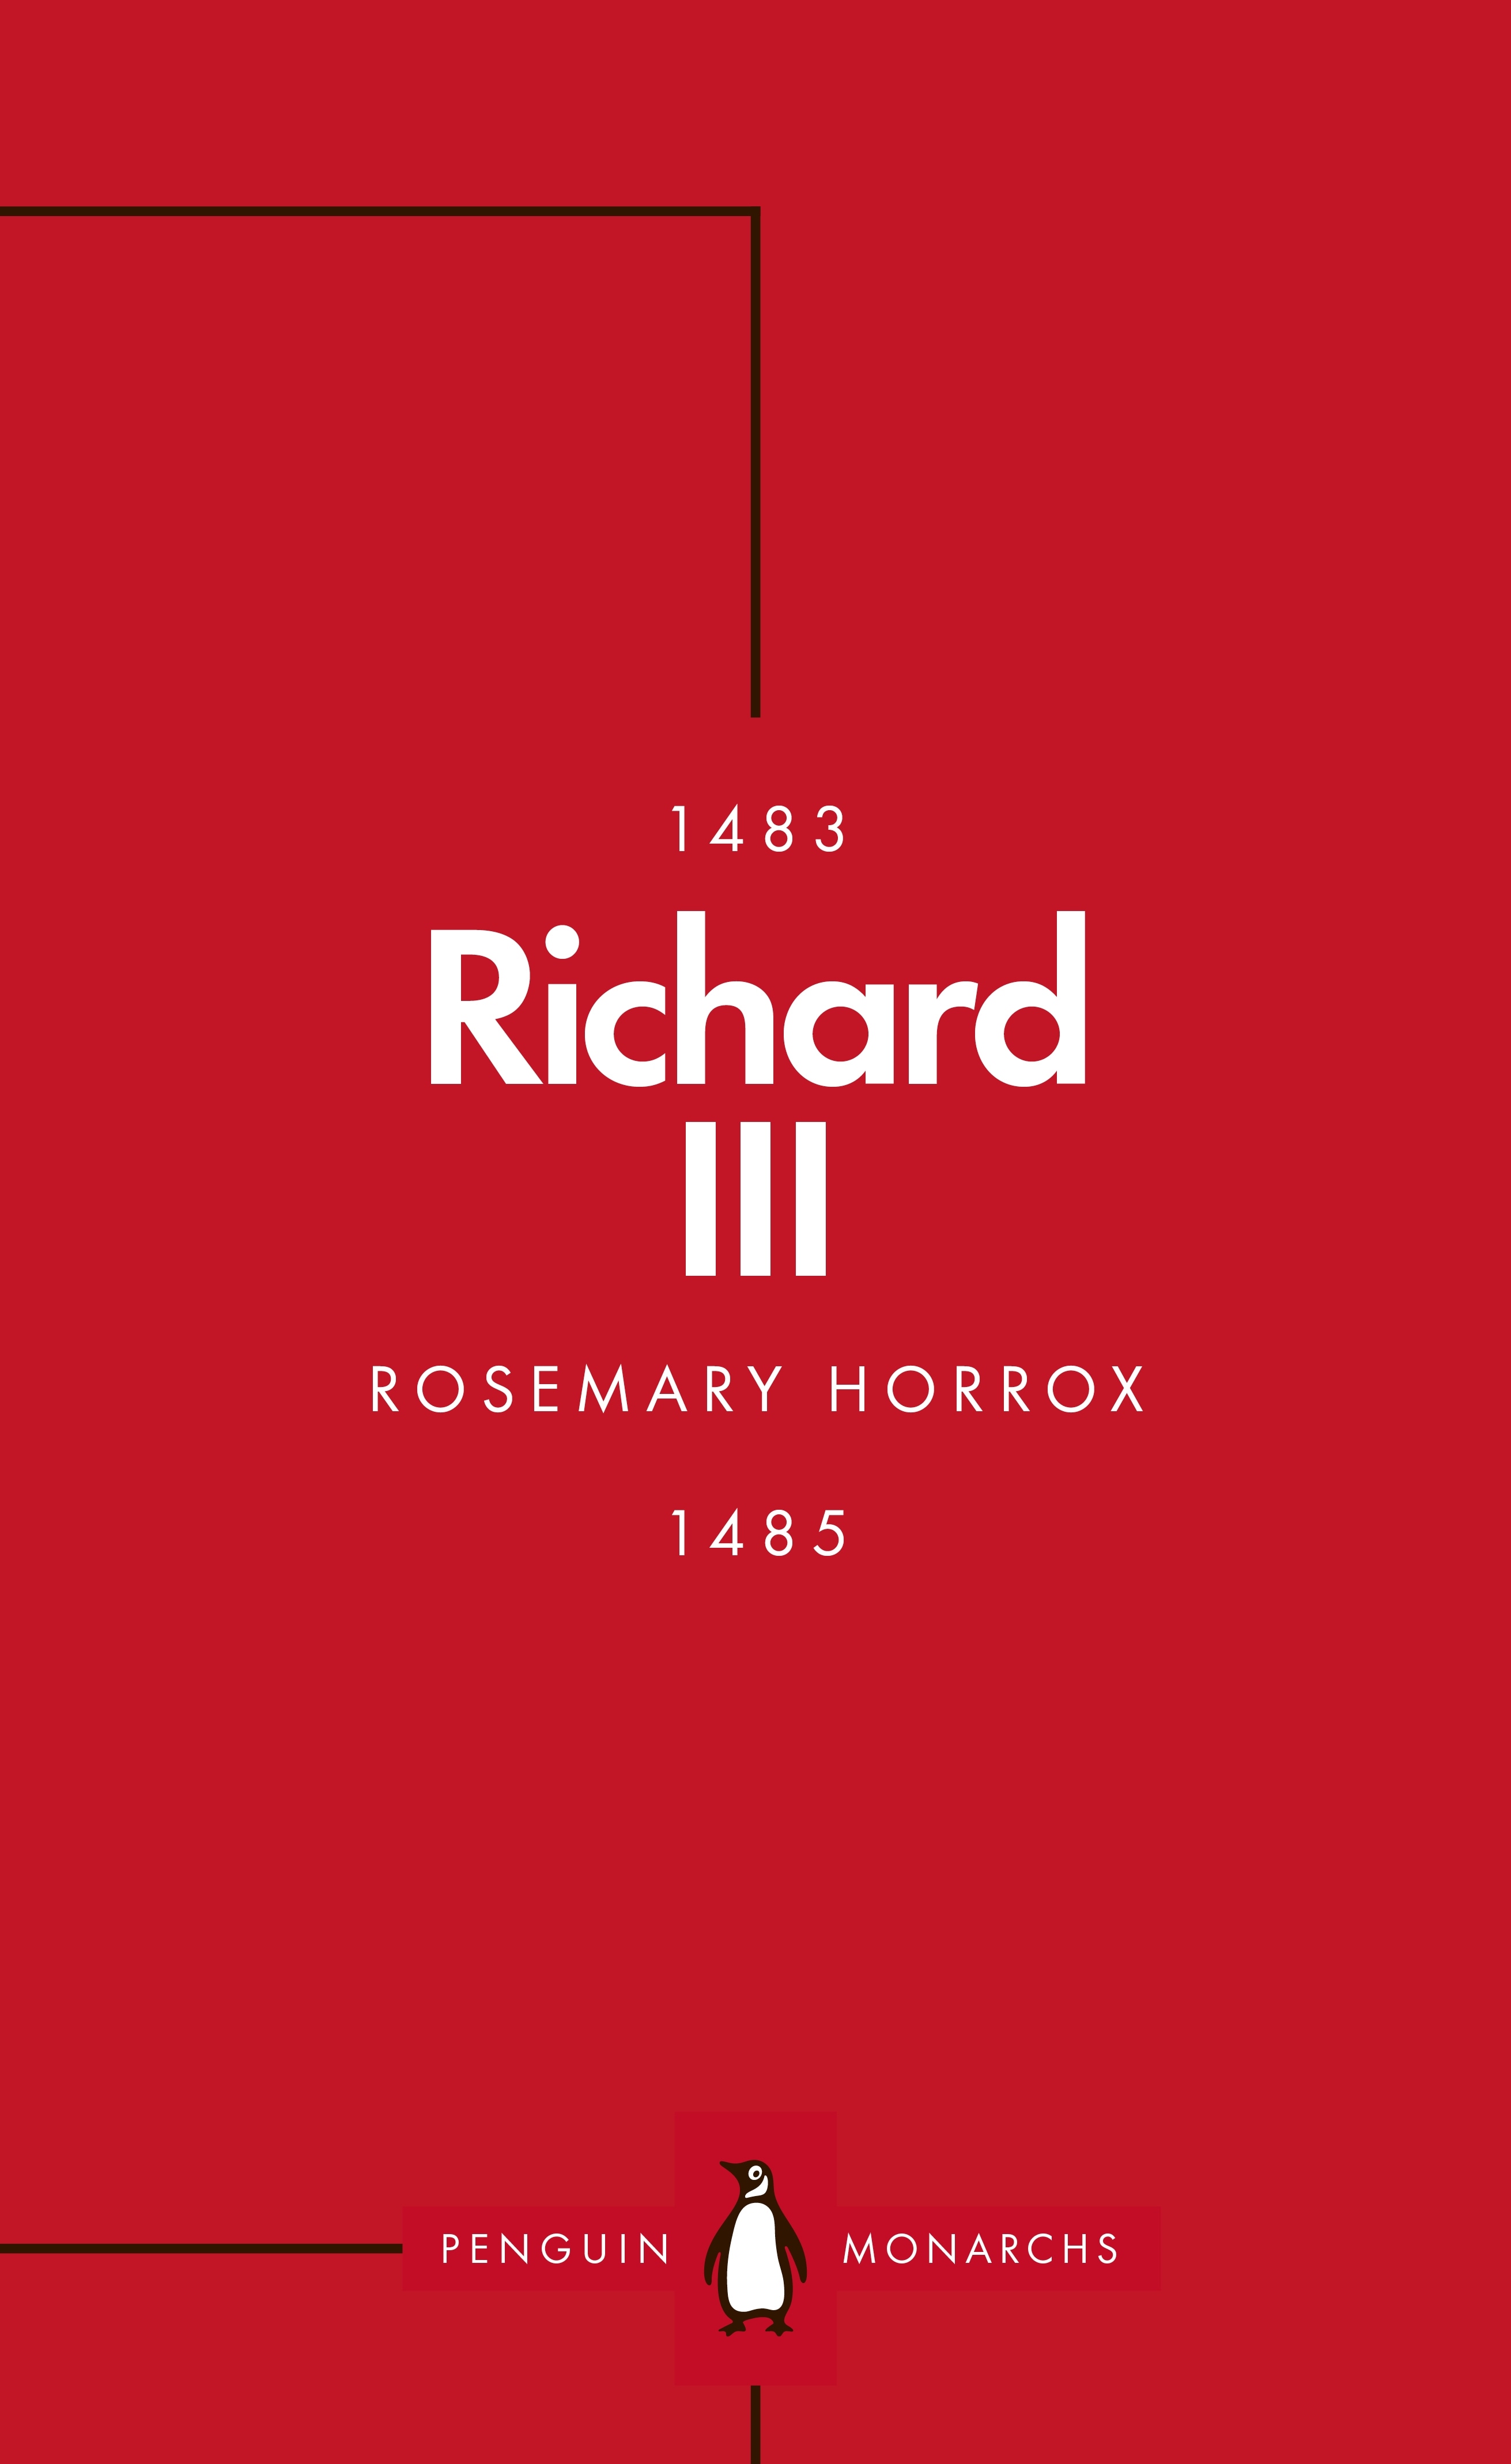 Book “Richard III (Penguin Monarchs)” by Rosemary Horrox — April 7, 2022